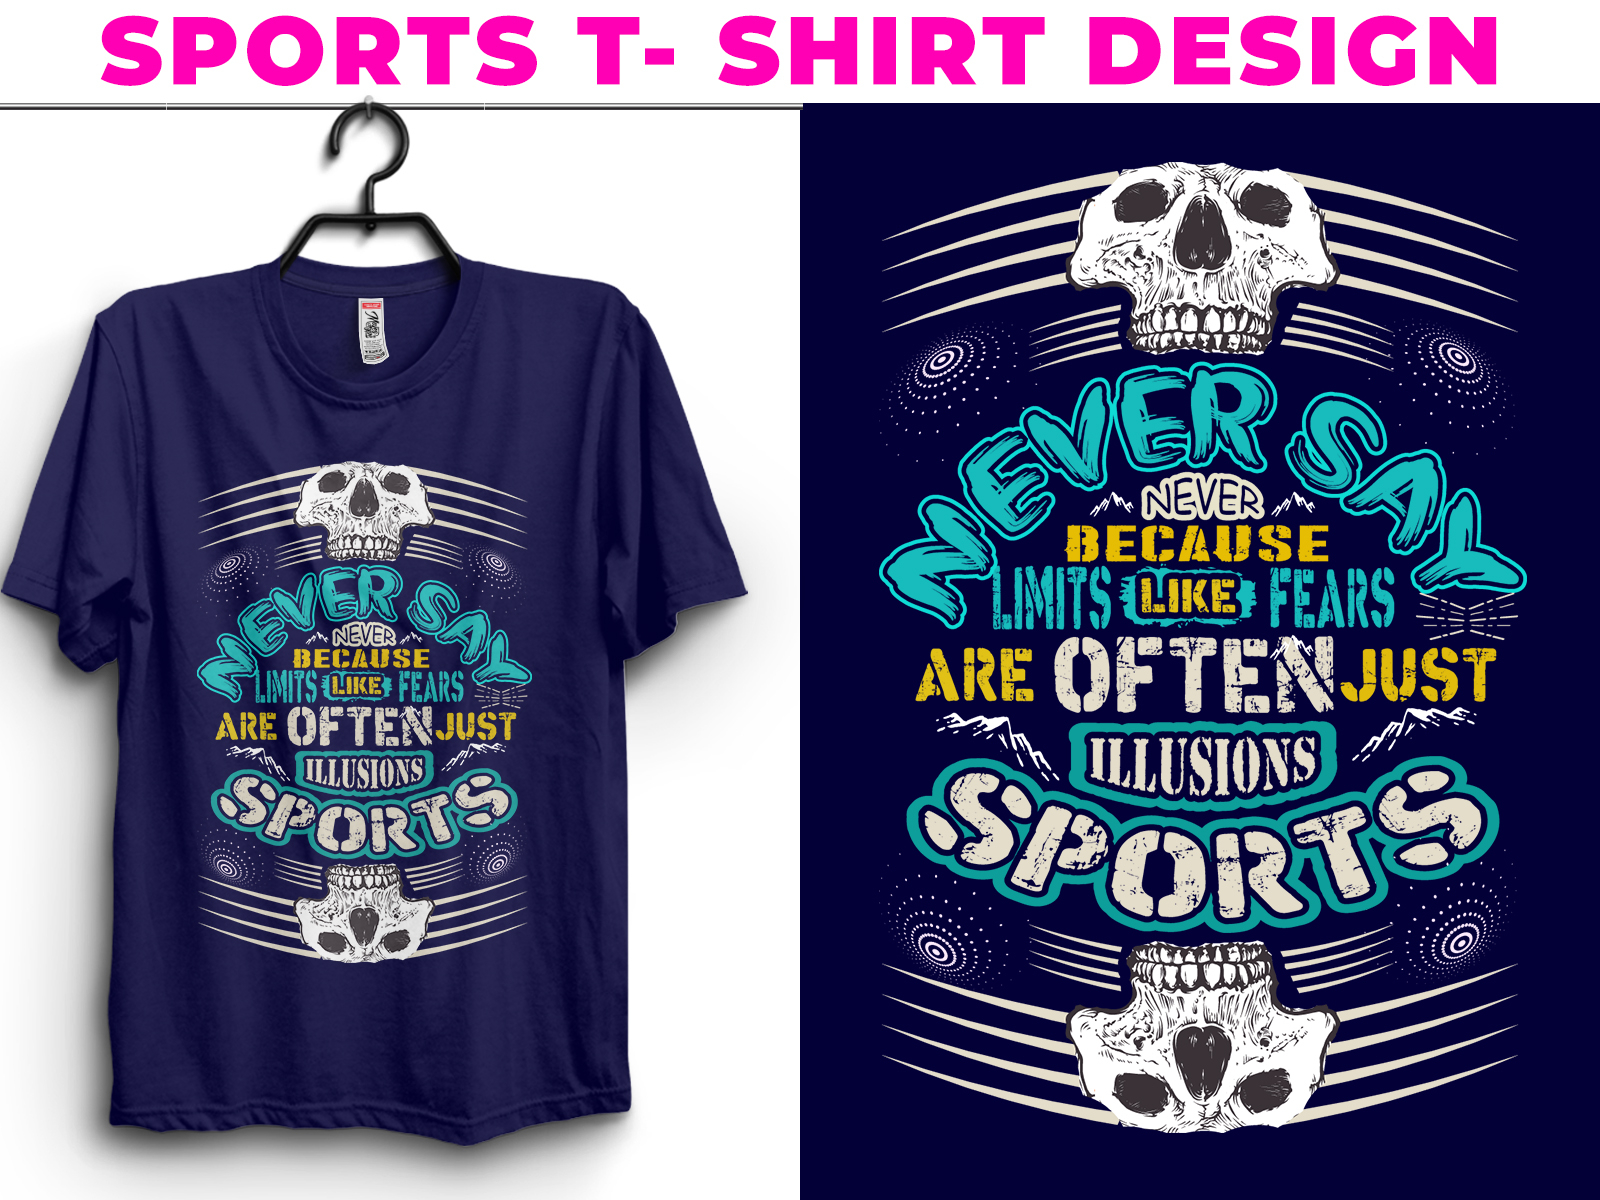 sports-t-shirt-design-by-aroy00225-on-dribbble